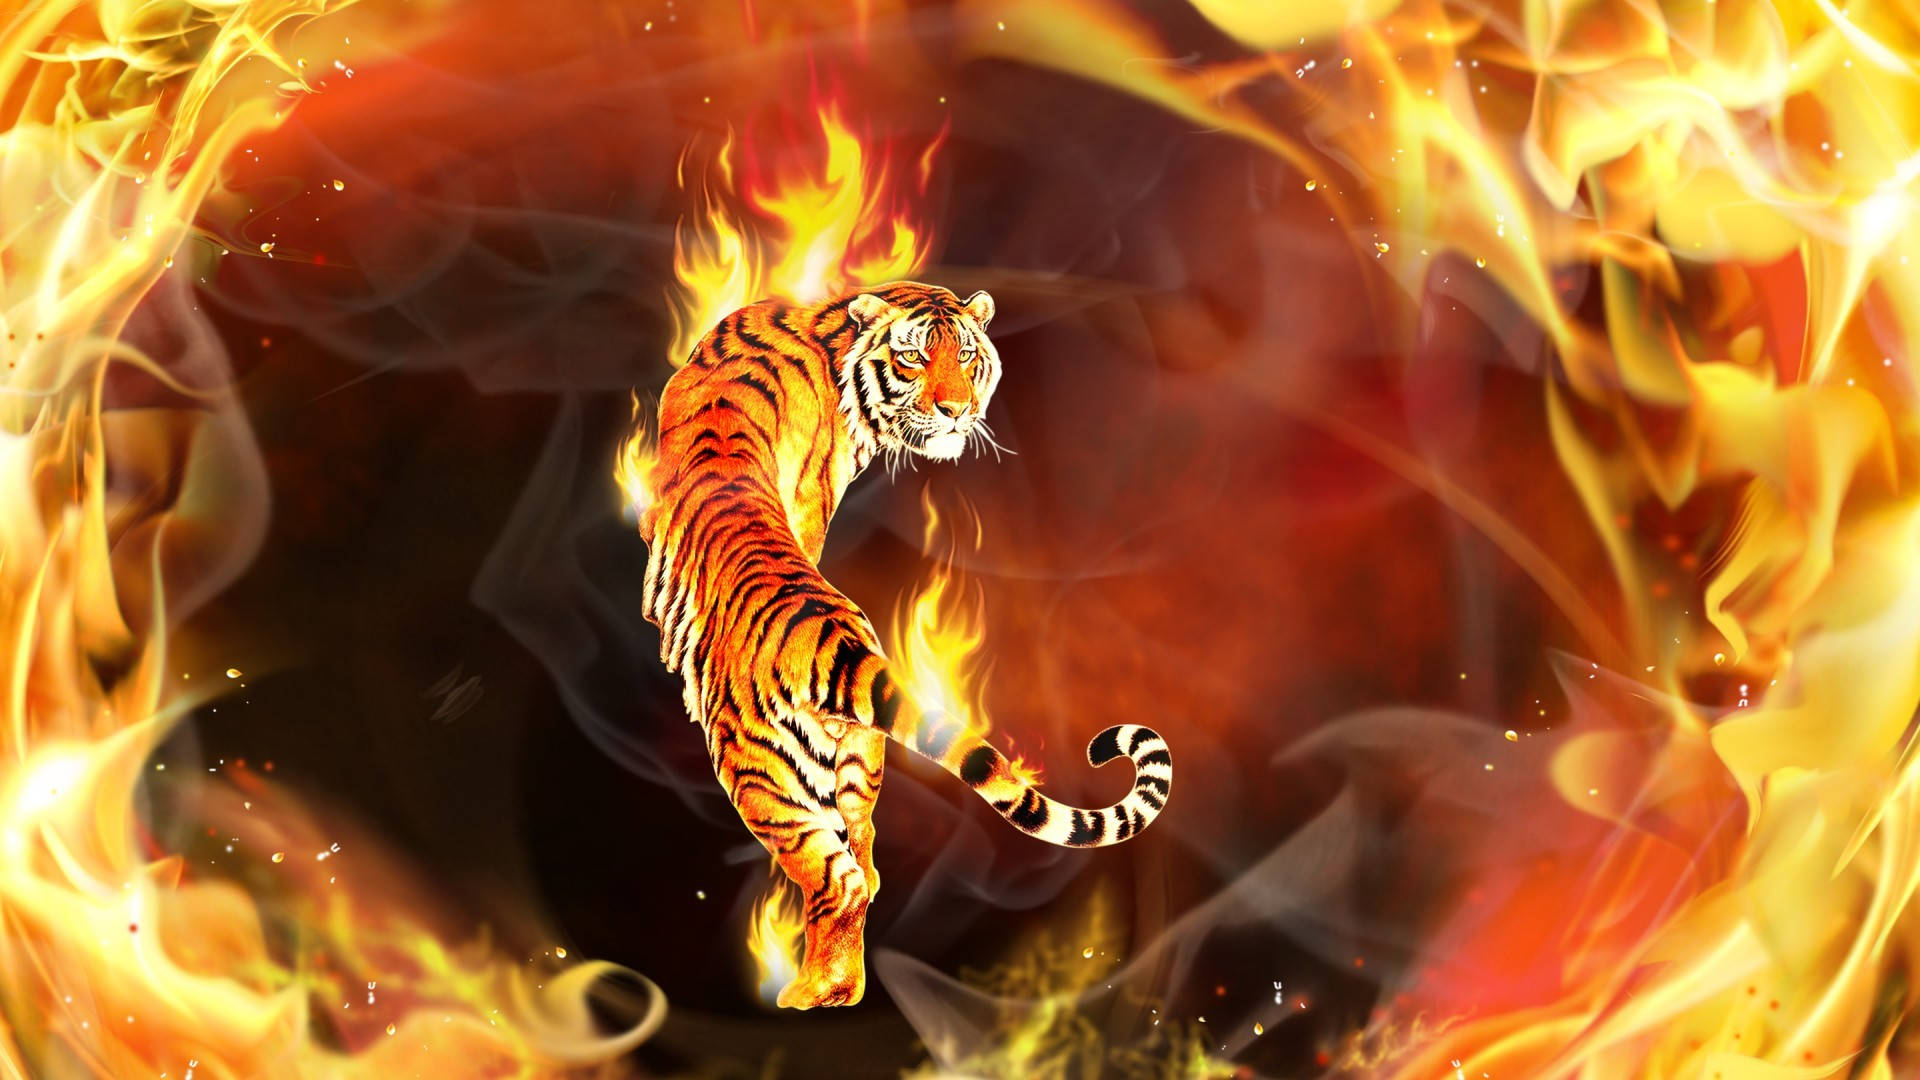 Download On Fire Tiger Wallpaper 